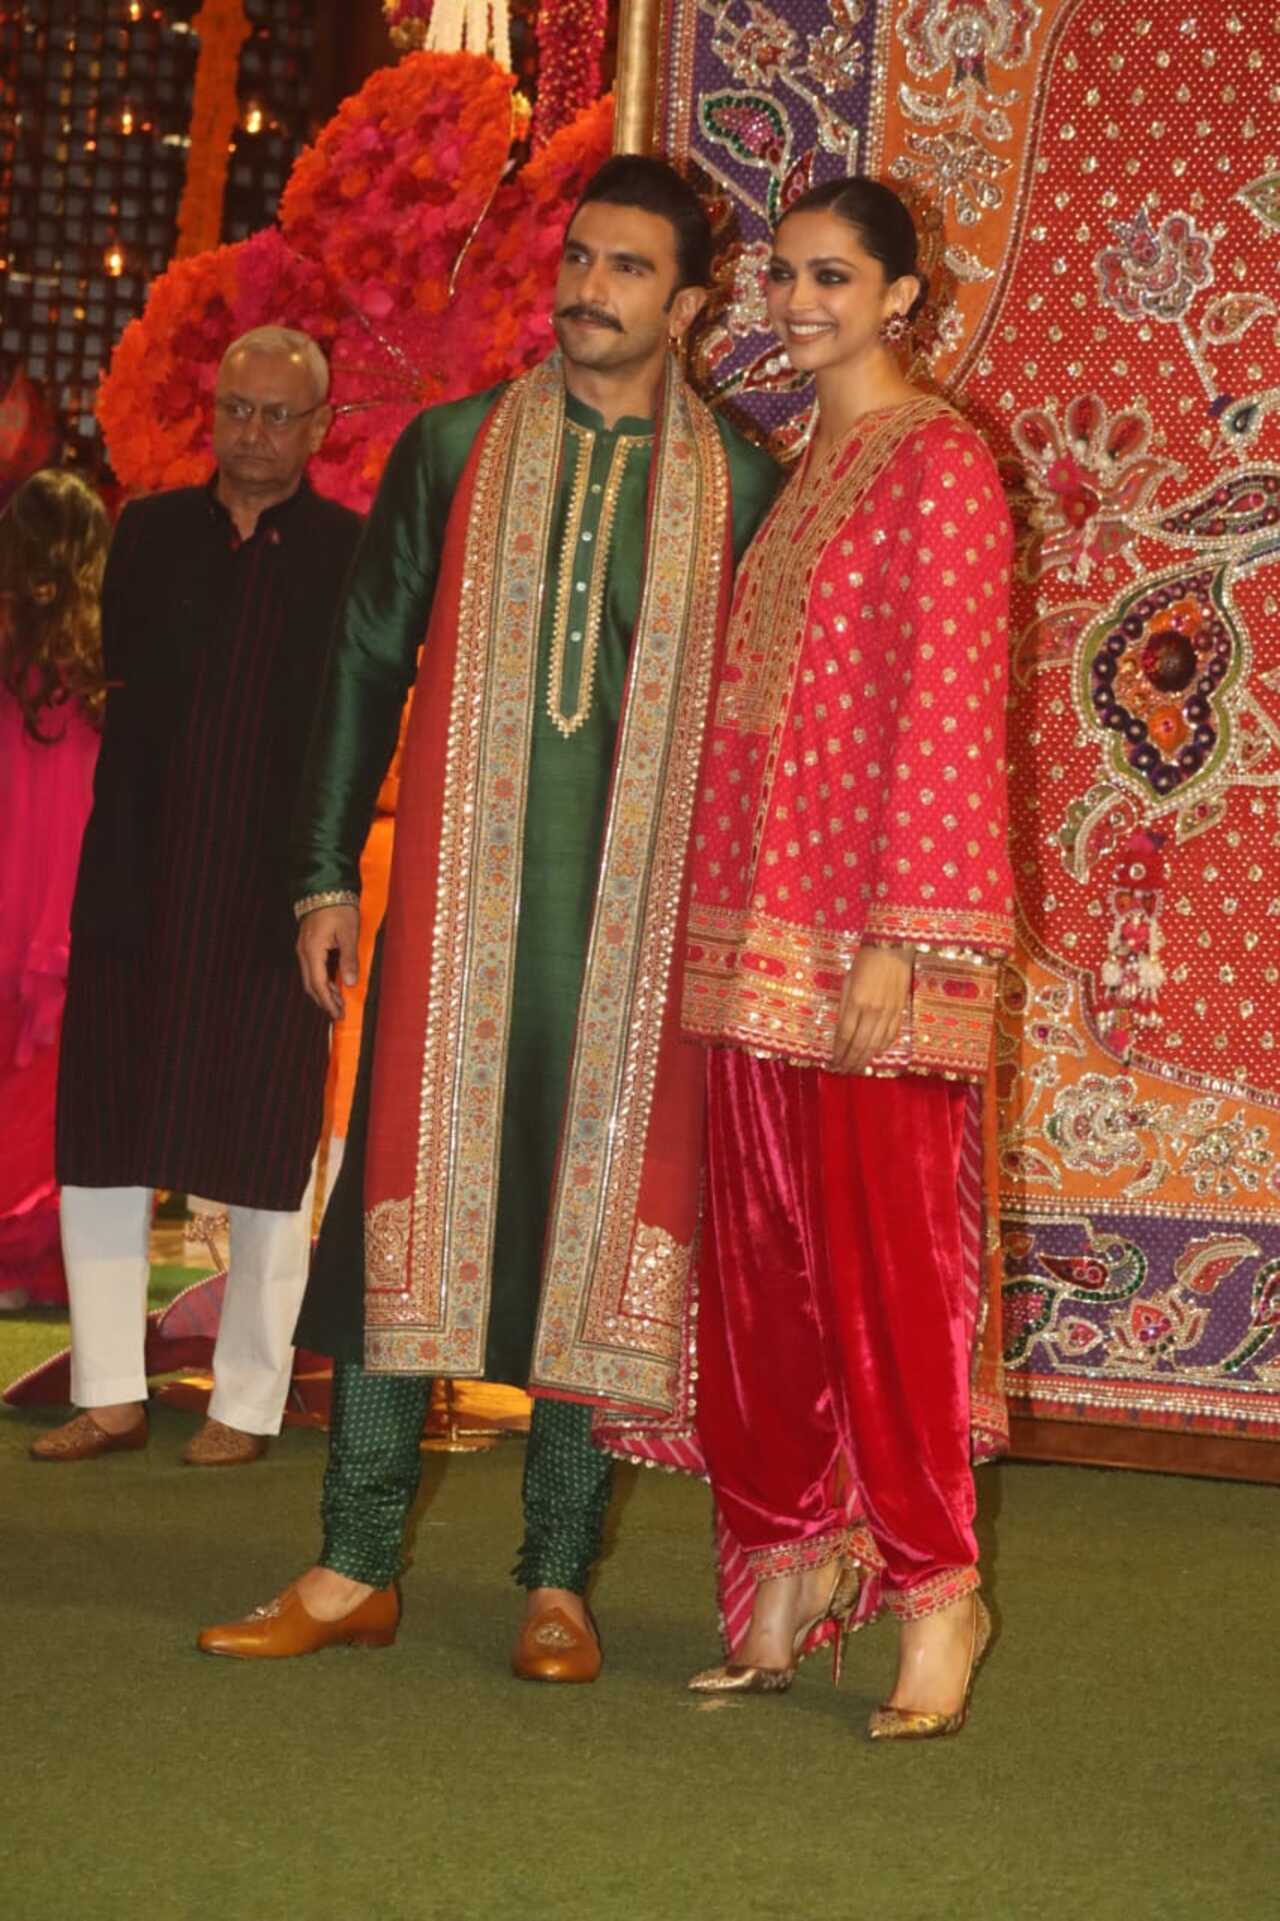 Ranveer Singh and Deepika Padukone attended the Ambanis' Ganesh Puja. The actress wore a bright red outfit whereas he opted for green